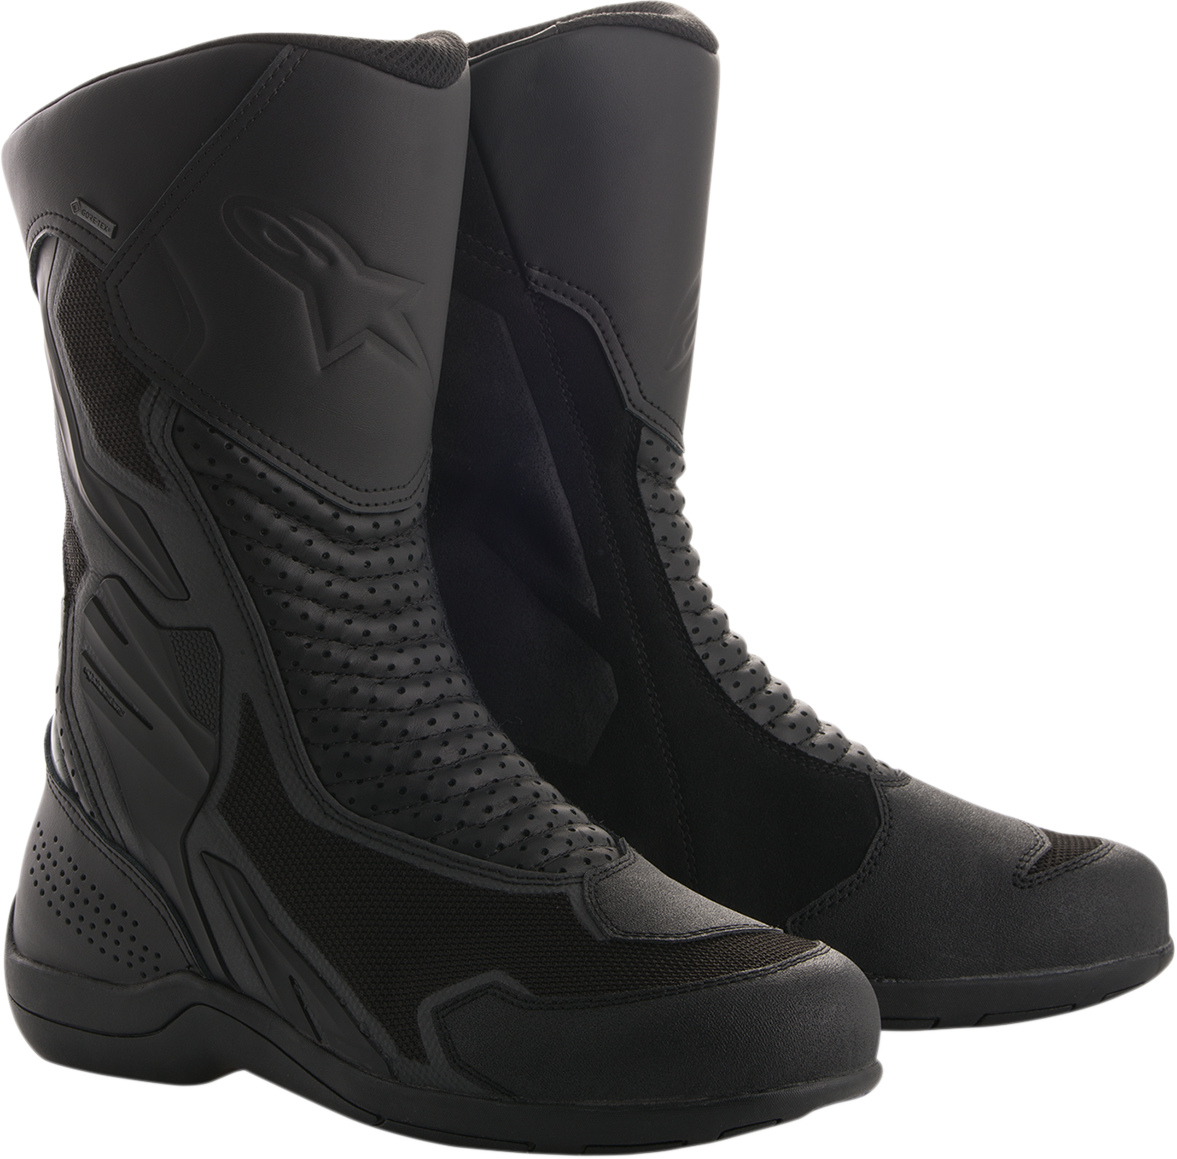 Alpinestars Mens Leather Air Plus GTX Motorcycle Riding Street Racing Boots